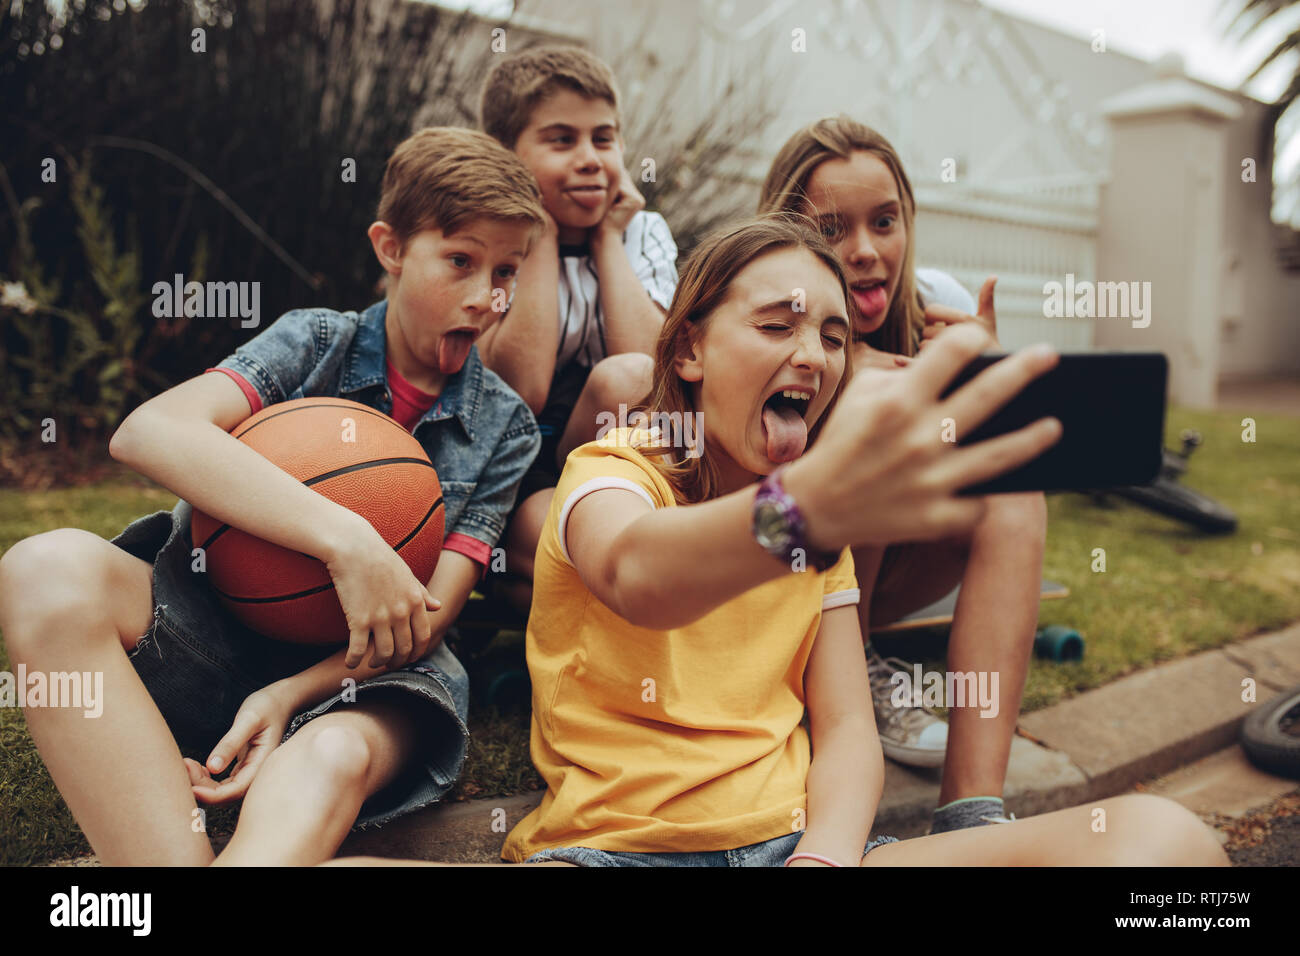 Kids making funny faces and sticking out their tongue for a selfie. Girl taking a selfie with her friends sitting outdoors. Stock Photo